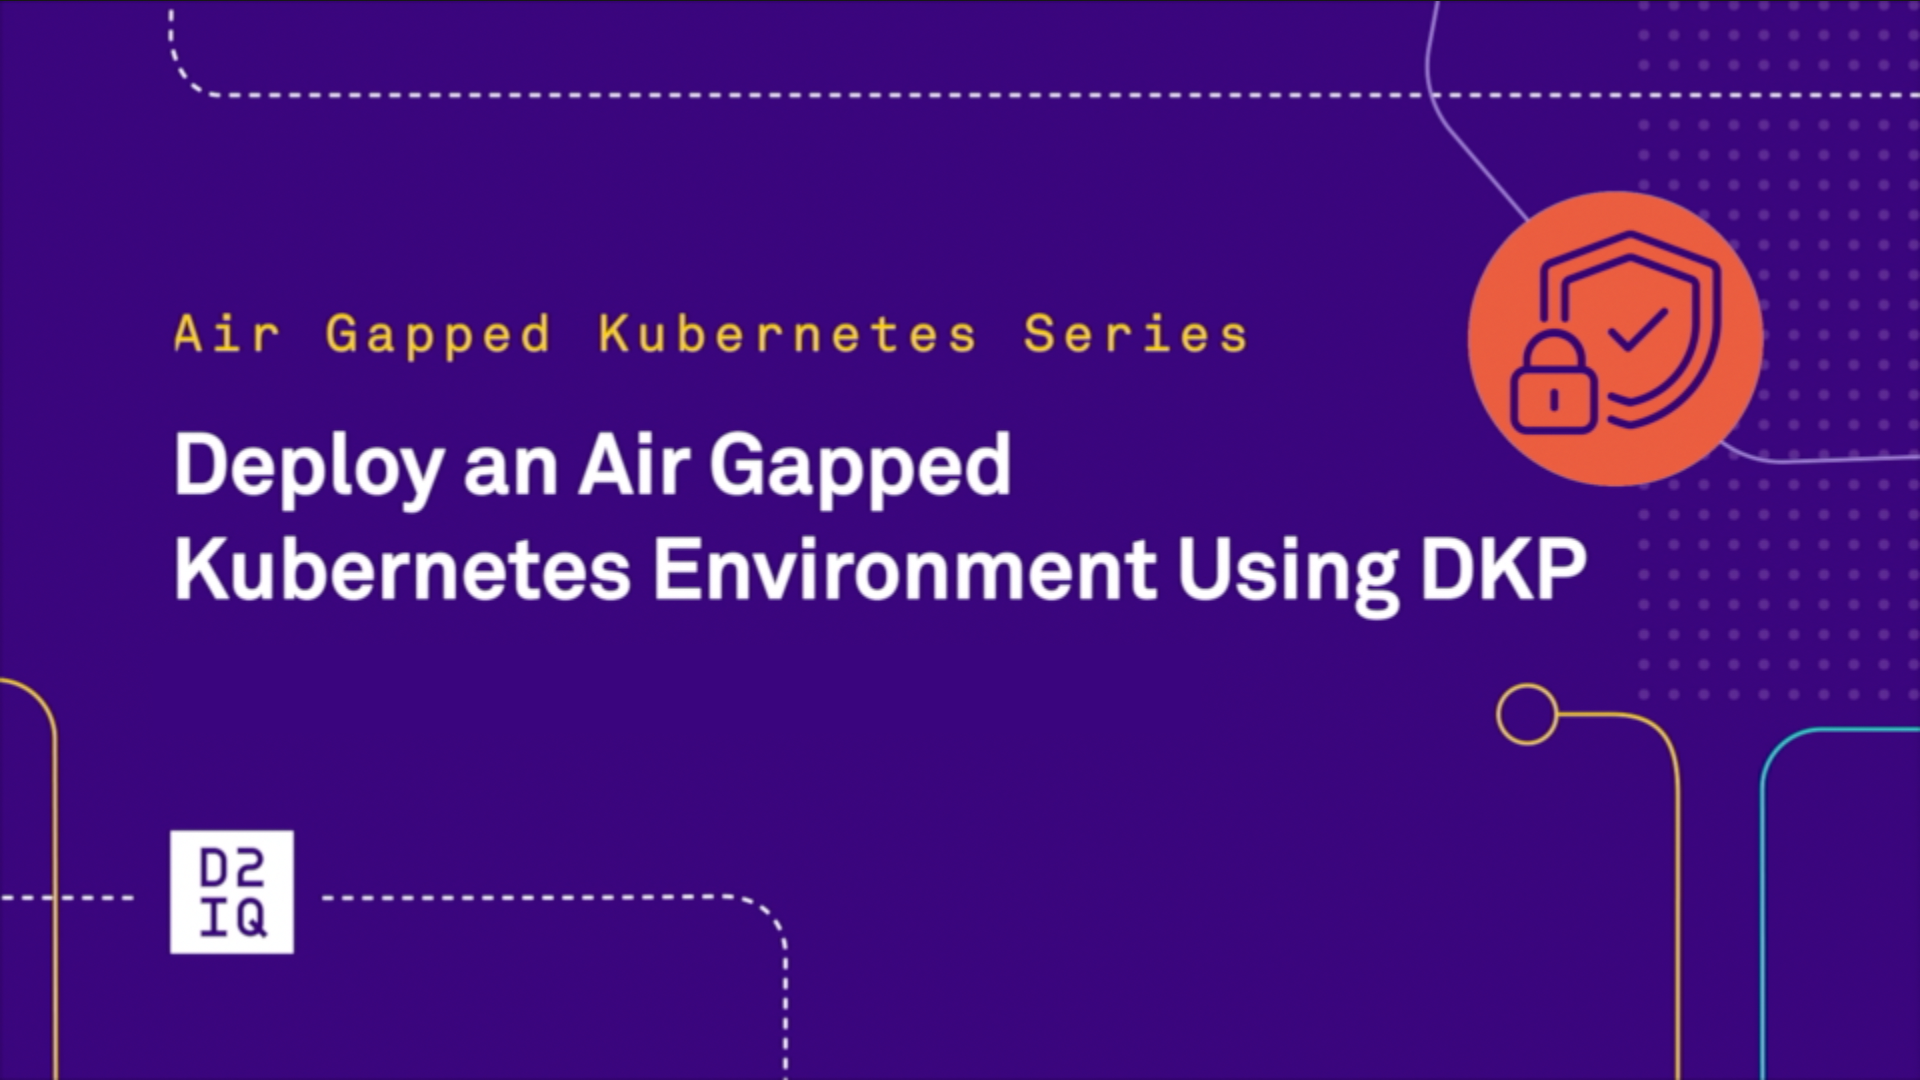 Air-Gapped Kubernetes: How to Deploy Using DKP